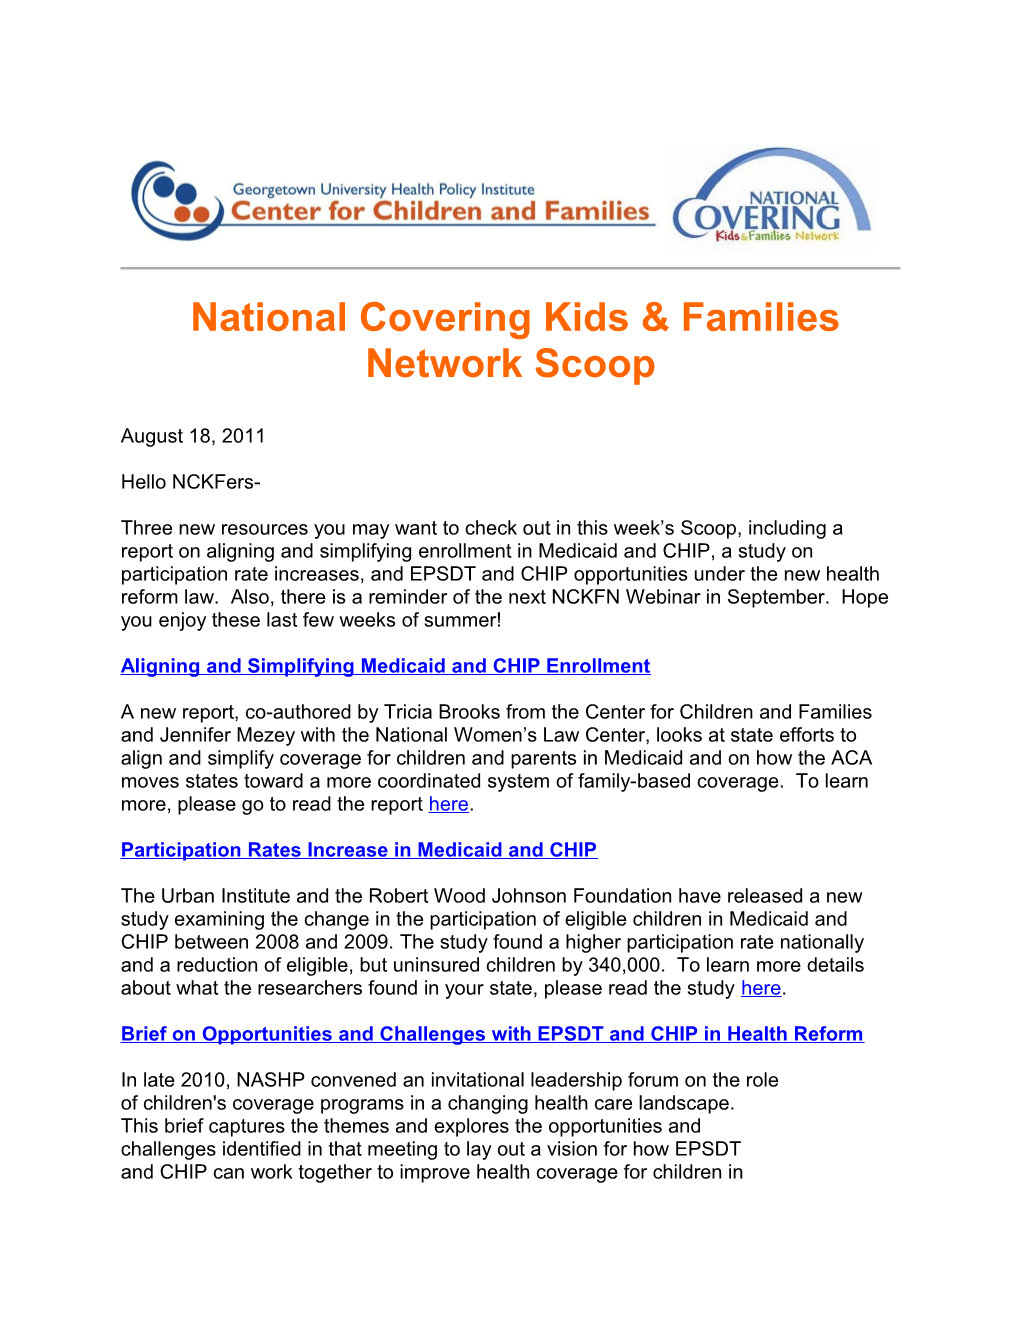 National Covering Kids & Families Network Scoop